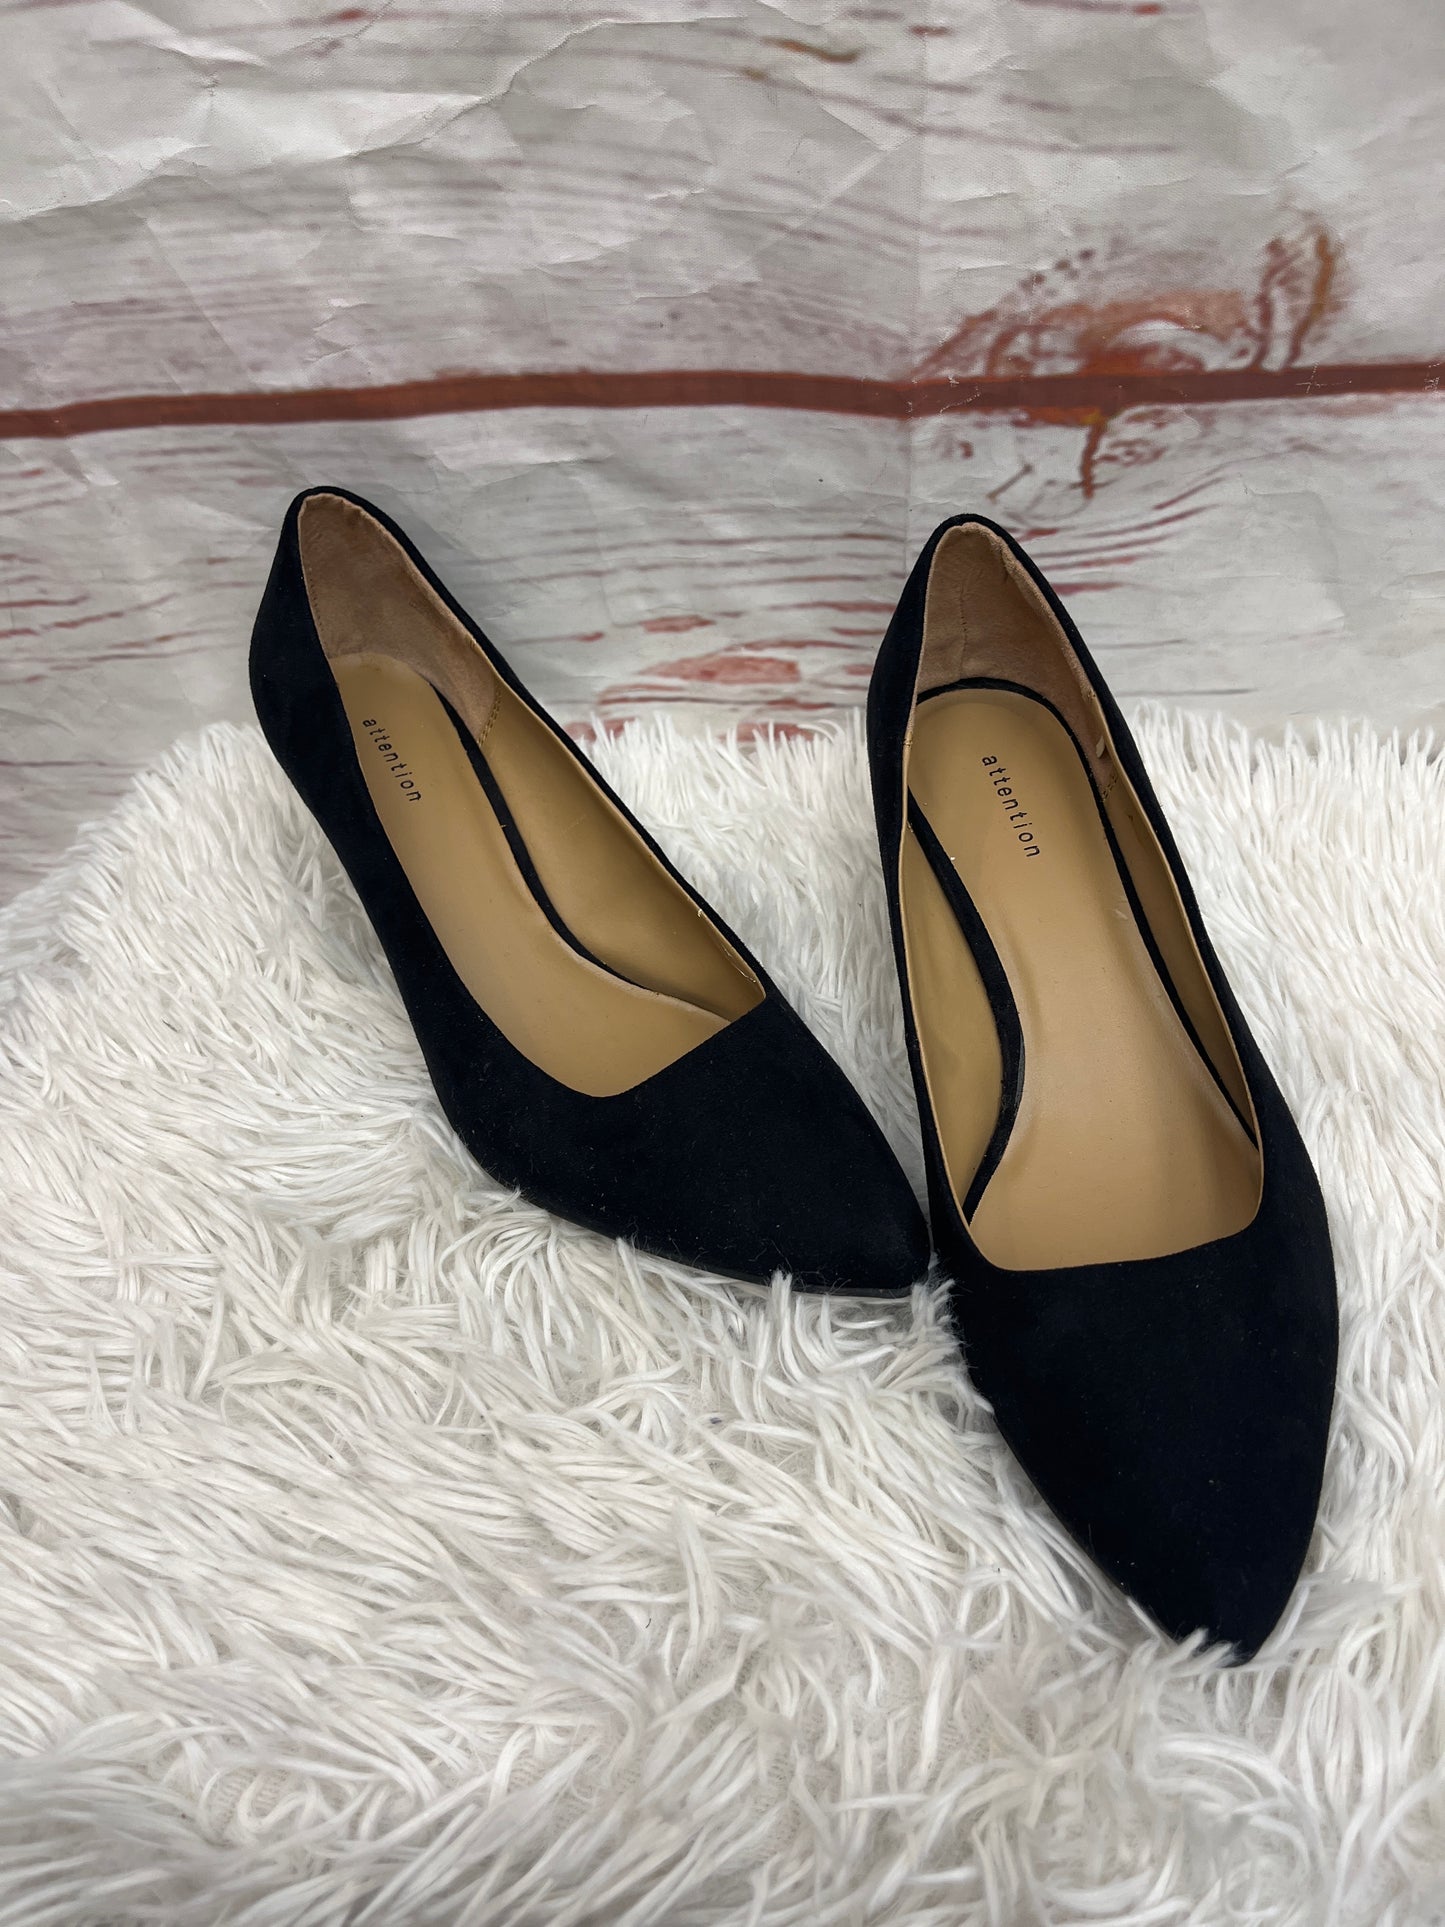 Shoes Heels Stiletto By Attention  Size: 9